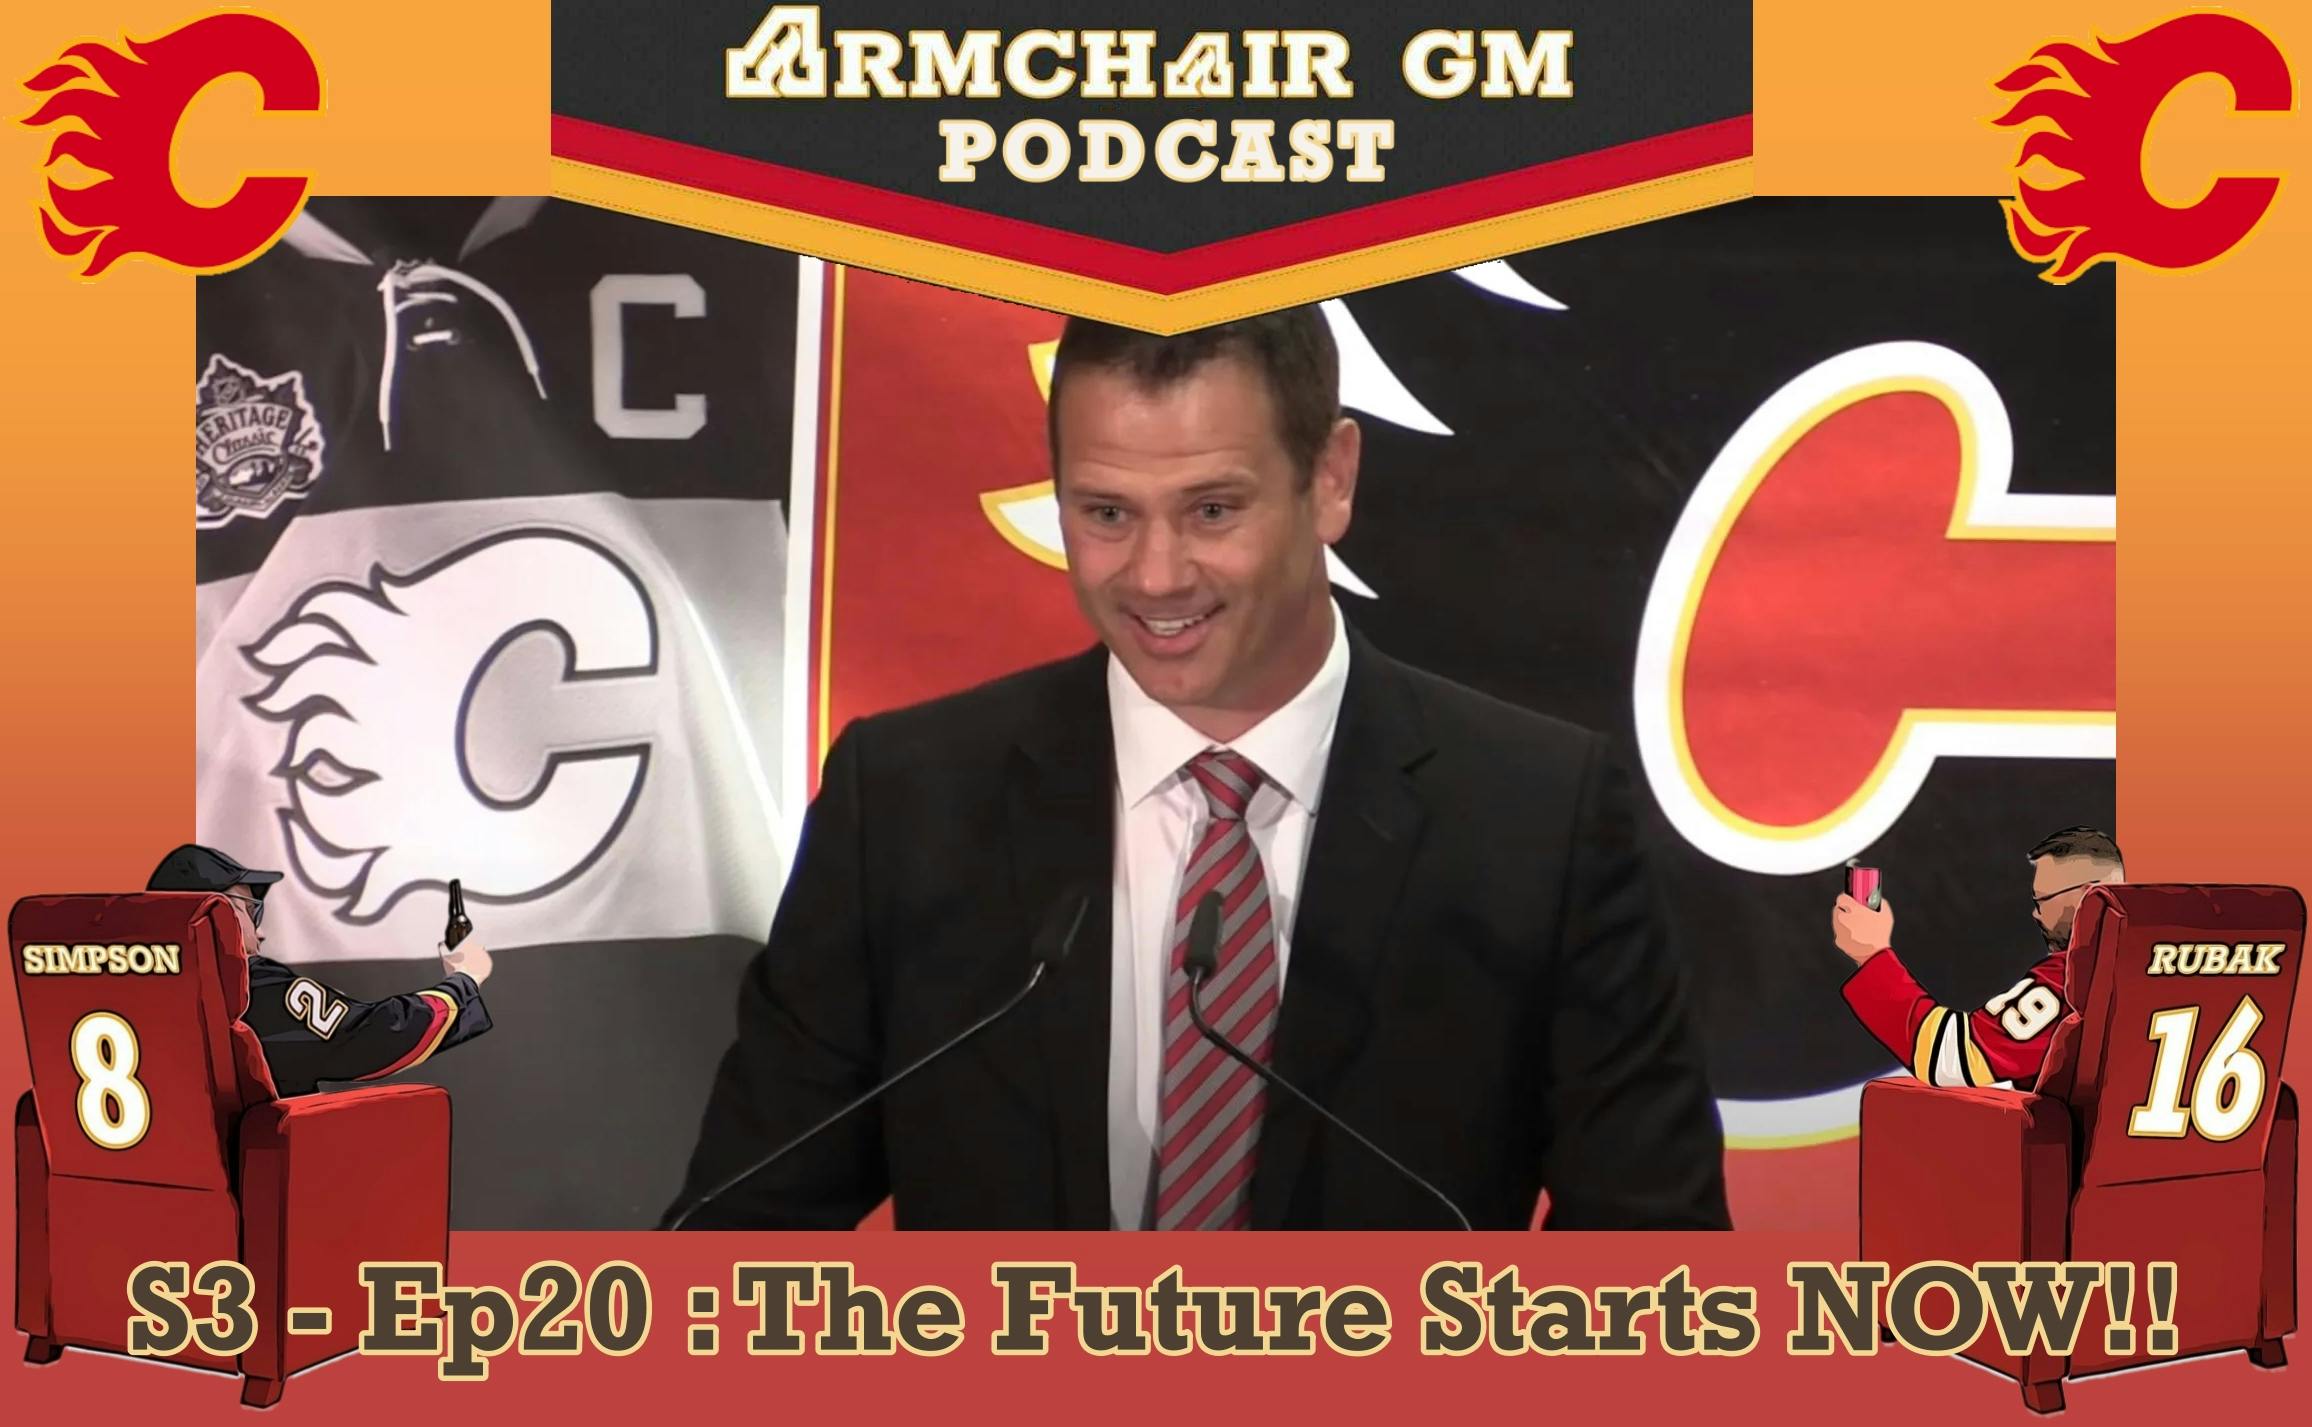 ArmChair GM Podcast S3 - Ep20 The Future Starts NOW!!